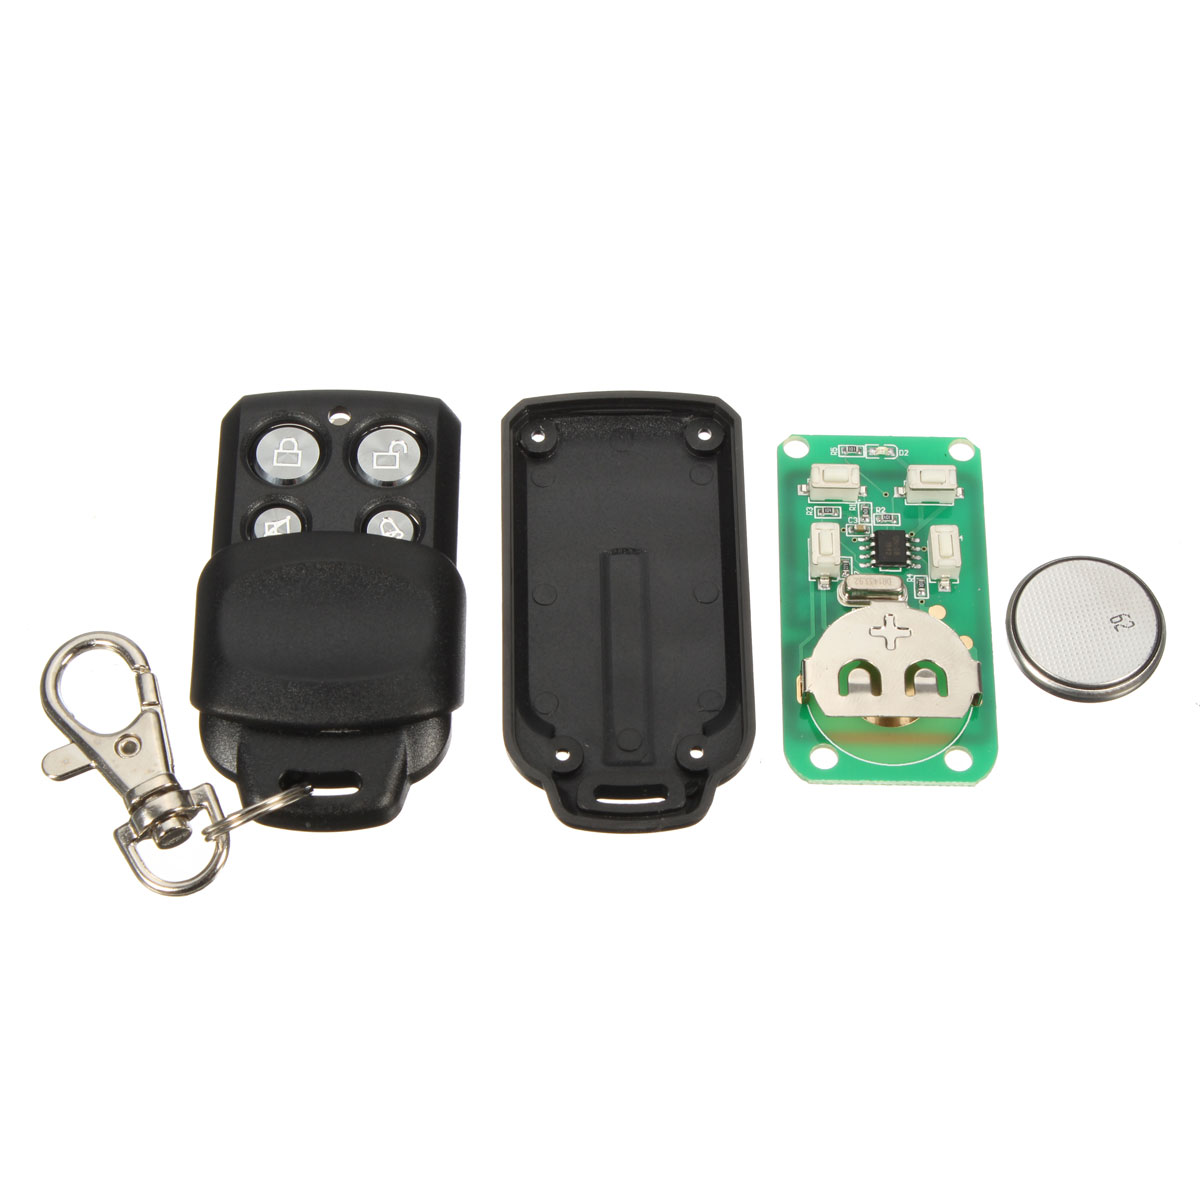 4-Button-433MHz-Garage-Gate-Key-Remote-Control-For-HE60-HE60R-HE60ANZ-HE4331-1064141